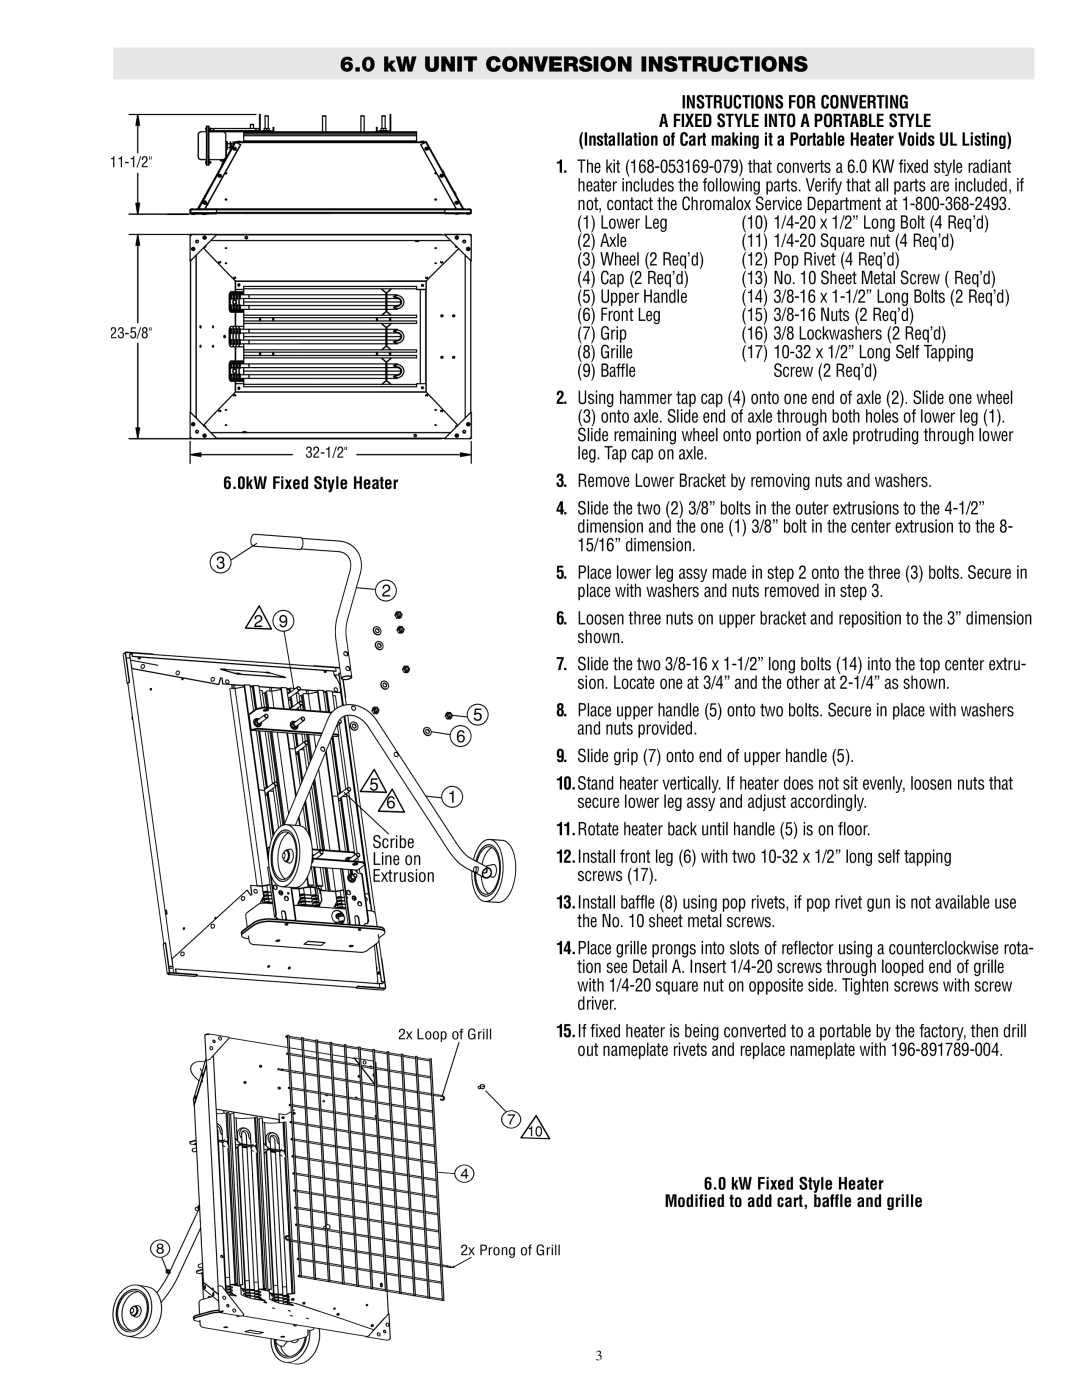 Chromalox STAR-14A kW UNIT CONVERSION INSTRUCTIONS, 6.0kW Fixed Style Heater, Modified to add cart, baffle and grille 